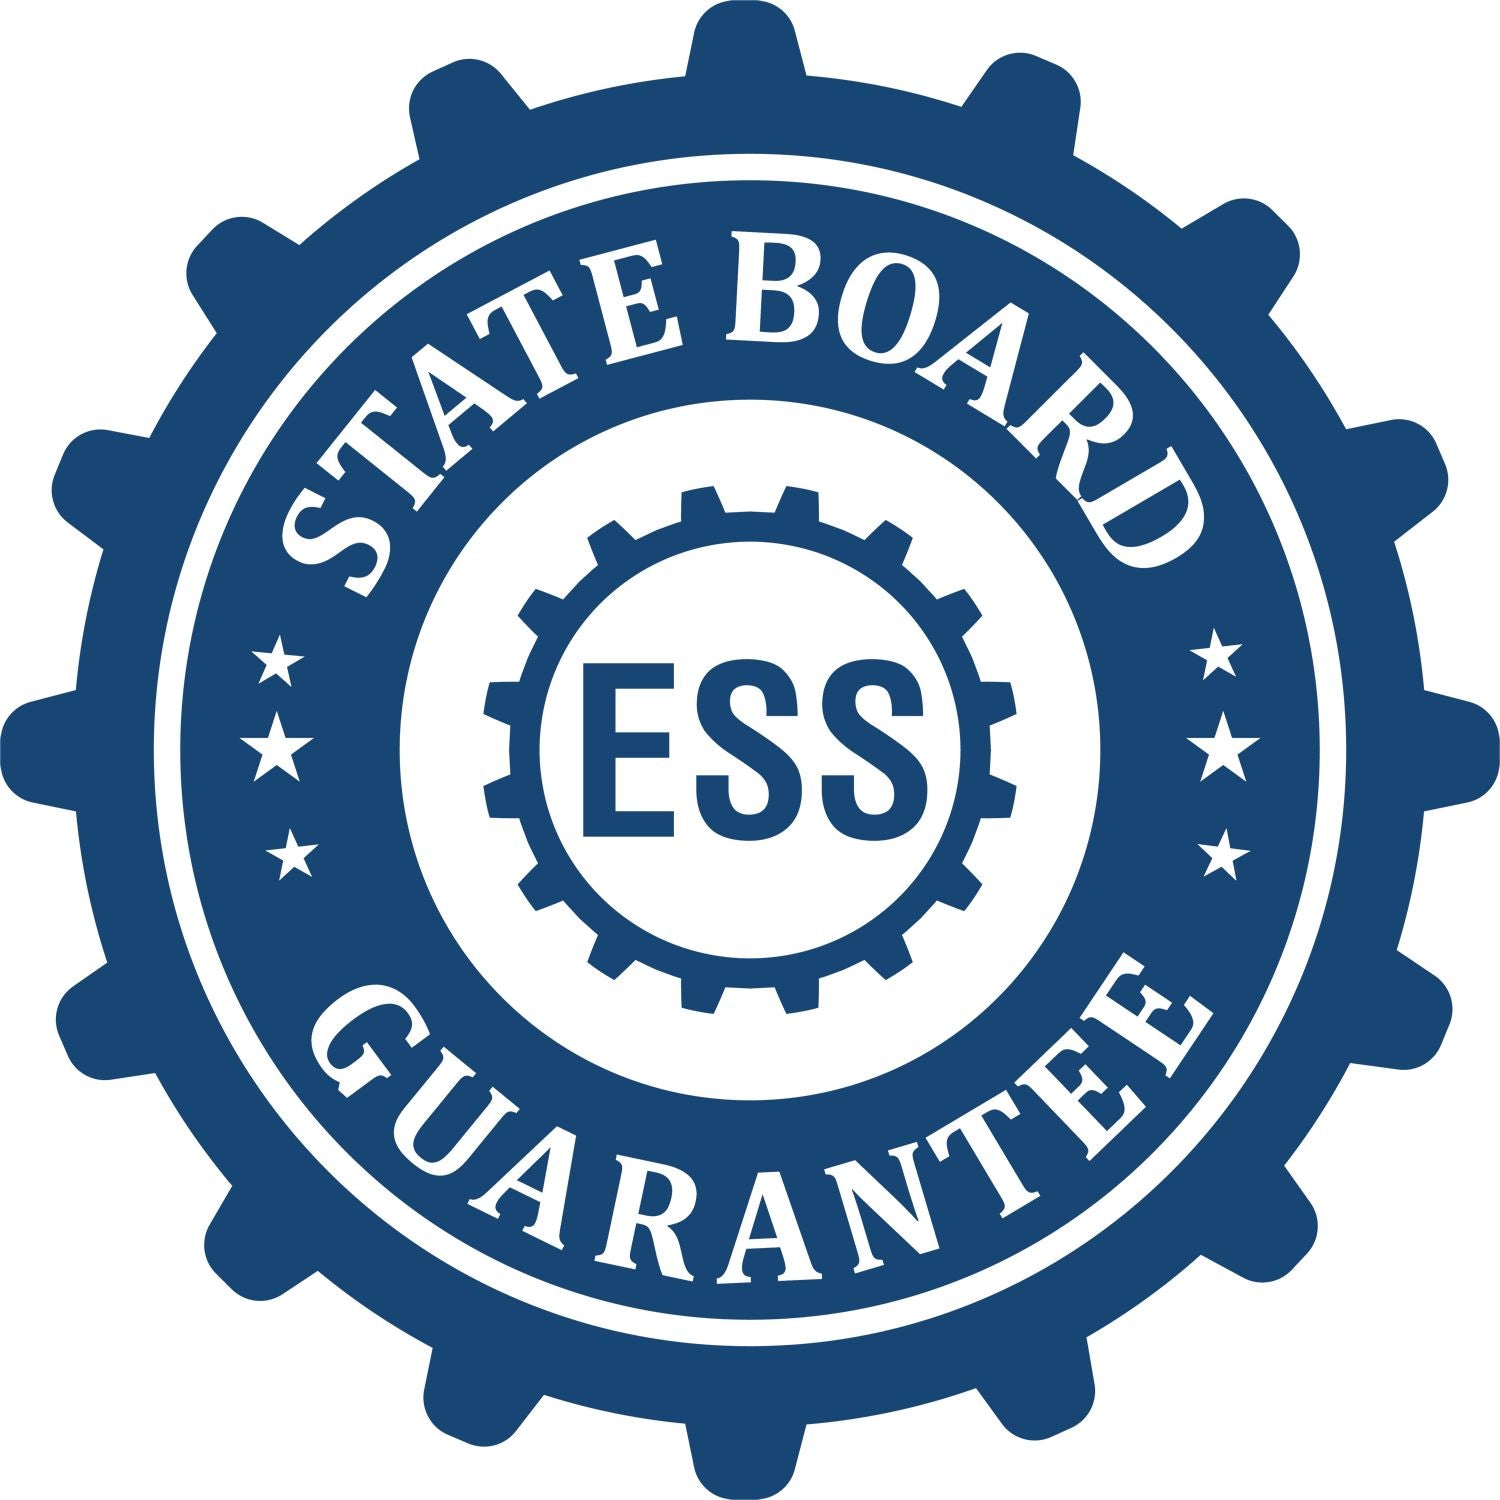 An emblem in a gear shape illustrating a state board guarantee for the Premium MaxLight Pre-Inked Florida Landscape Architectural Stamp product.